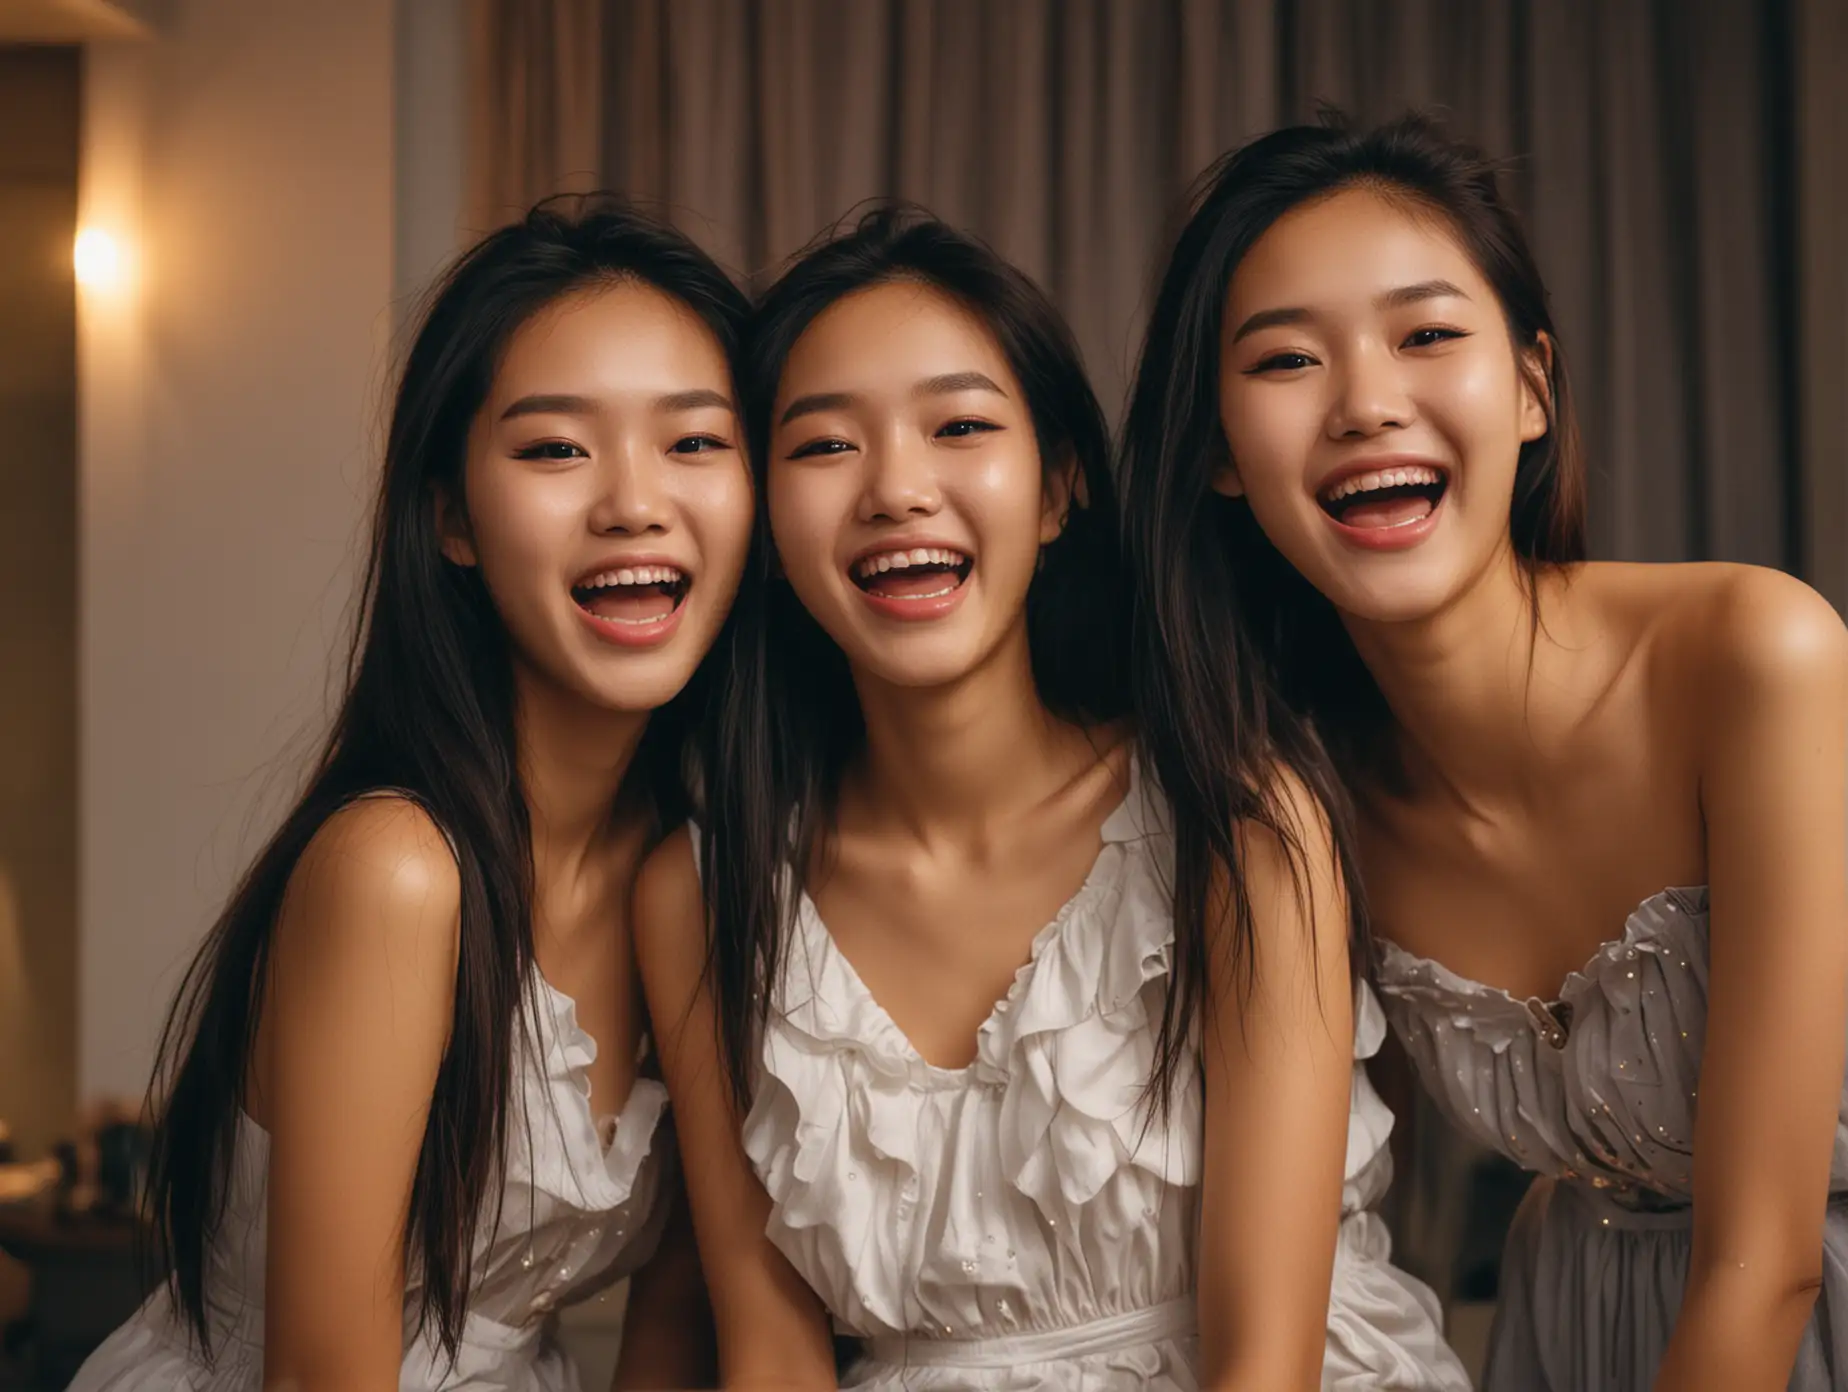 Joyful-Vietnamese-Models-Laughing-Together-at-Penthouse-Party